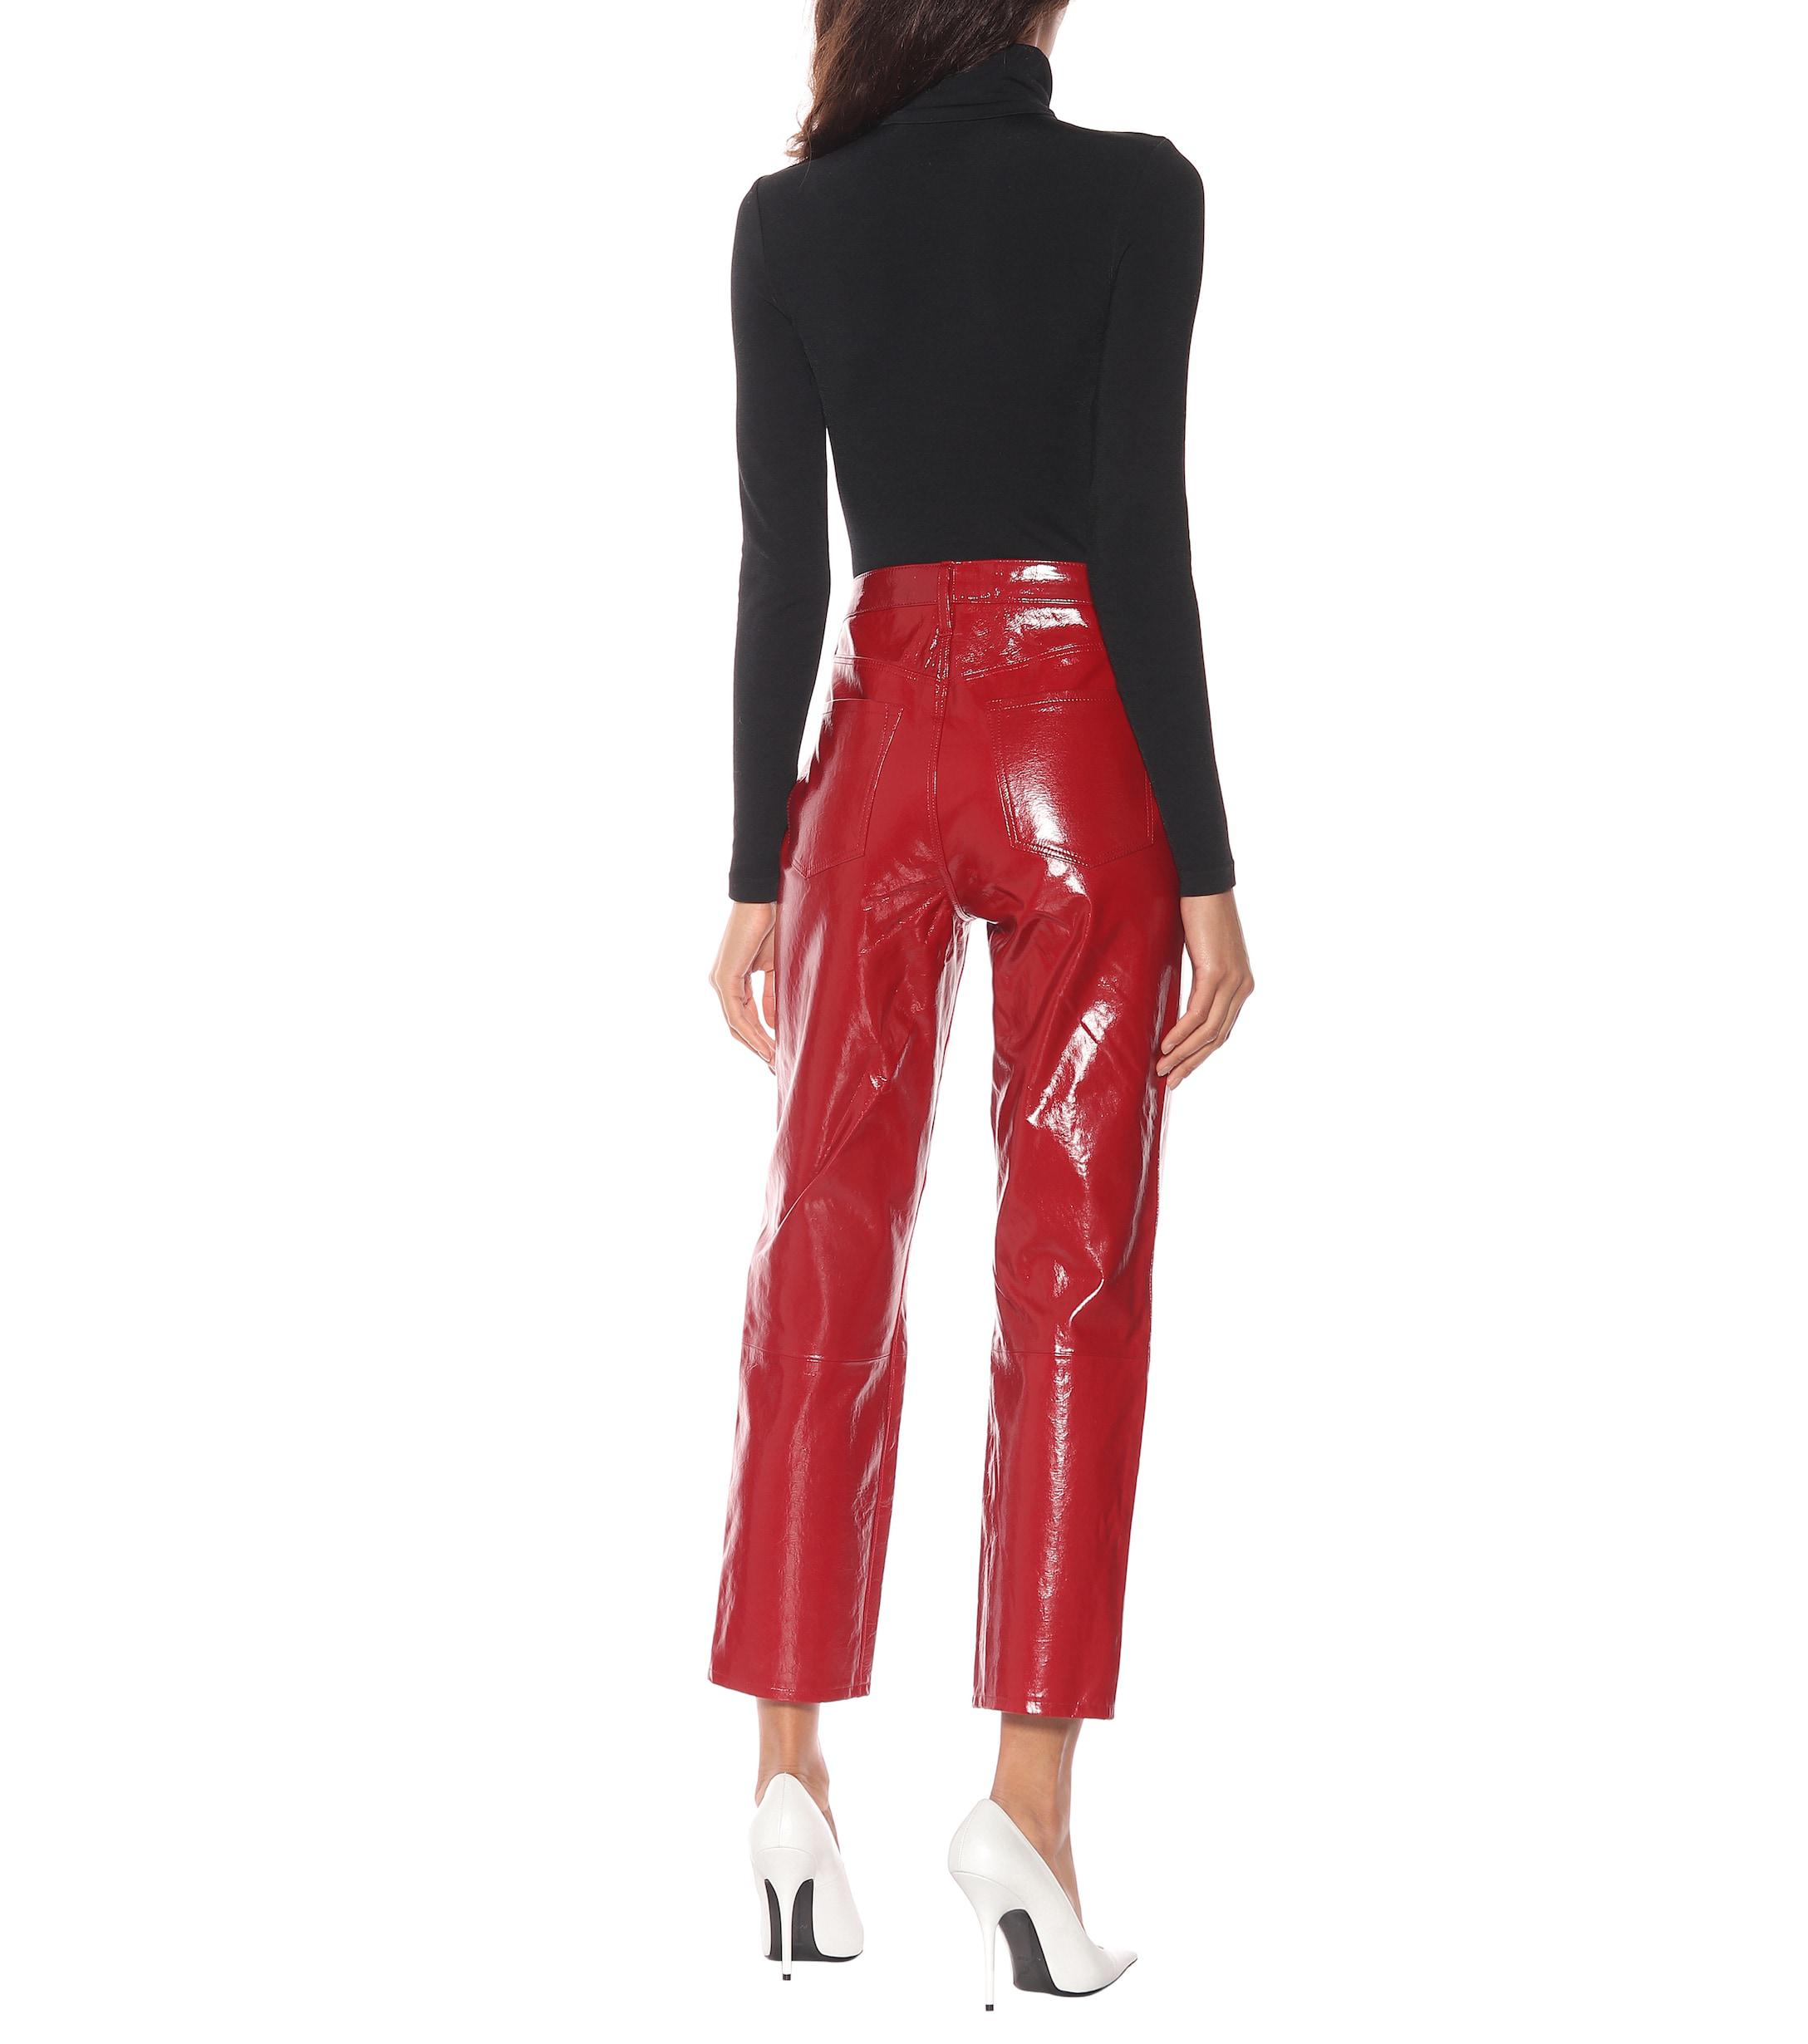 J Brand Ruby High-rise Patent Leather Pants in Patent Venetian (Red) - Lyst